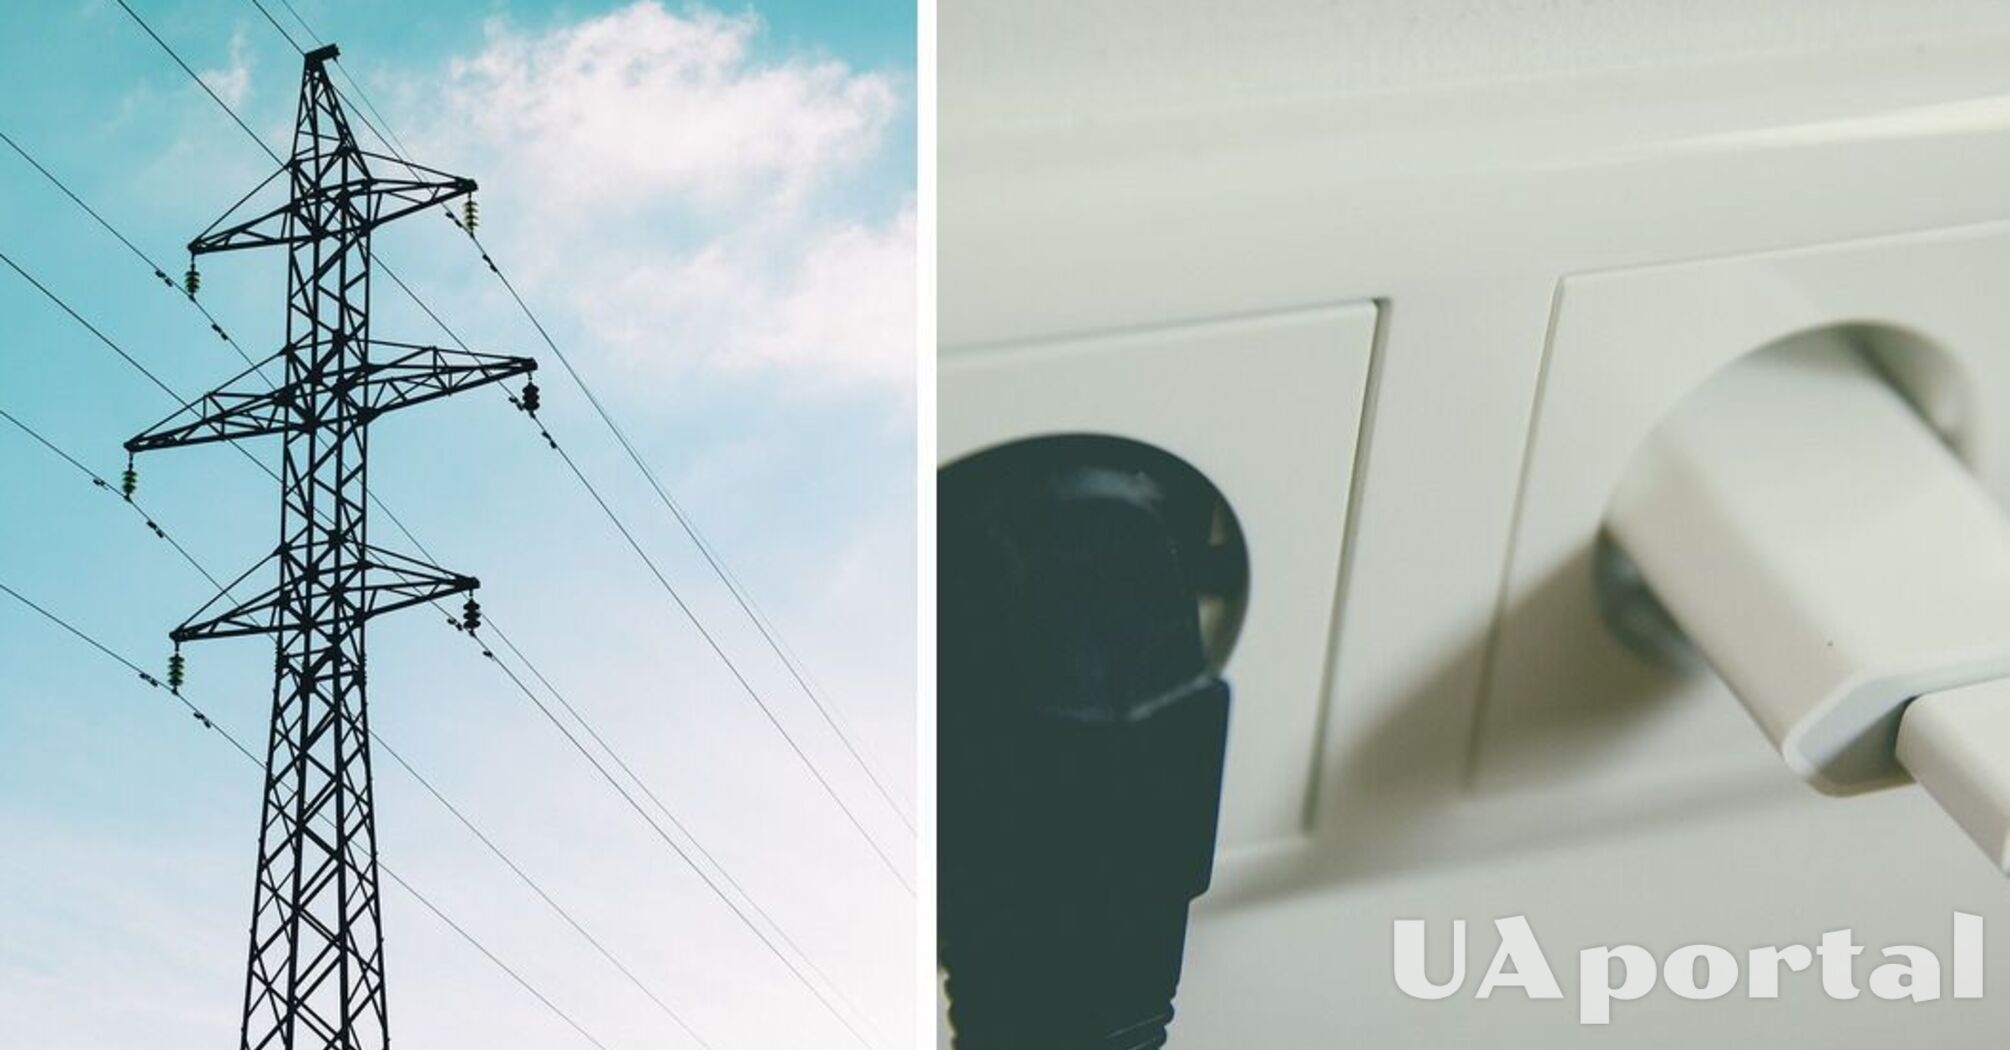 Emergency power outages schedules introduced in Ukraine: who will be left without electricity